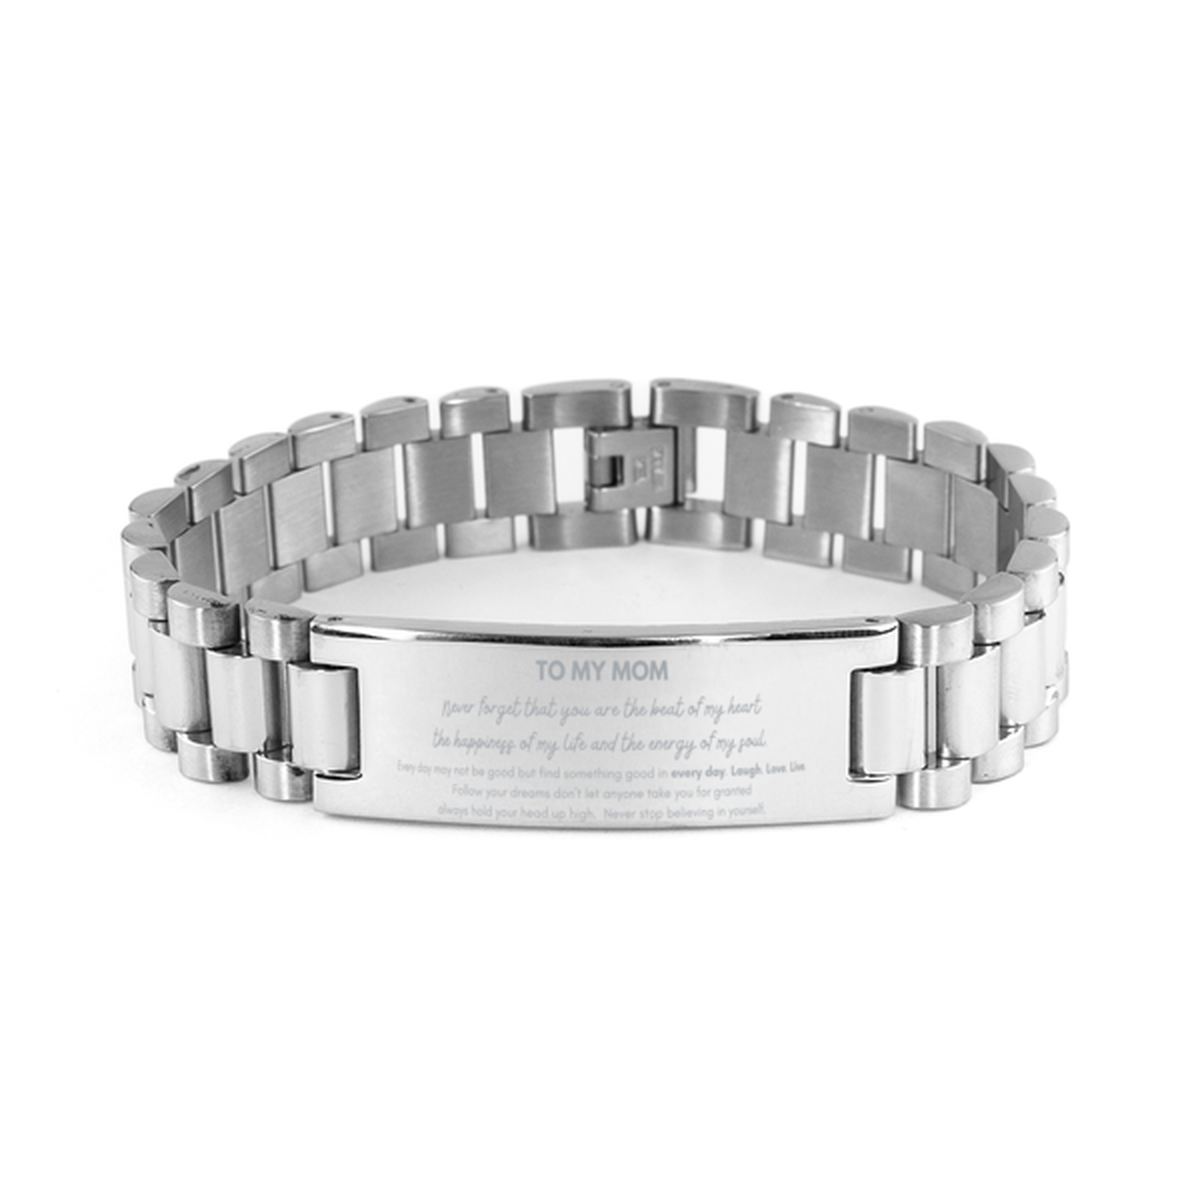 To My Mom Bracelet Gifts, Christmas Mom Ladder Stainless Steel Bracelet Present, Birthday Unique Motivational For Mom, To My Mom Never forget that you are the beat of my heart the happiness of my life and the energy of my soul